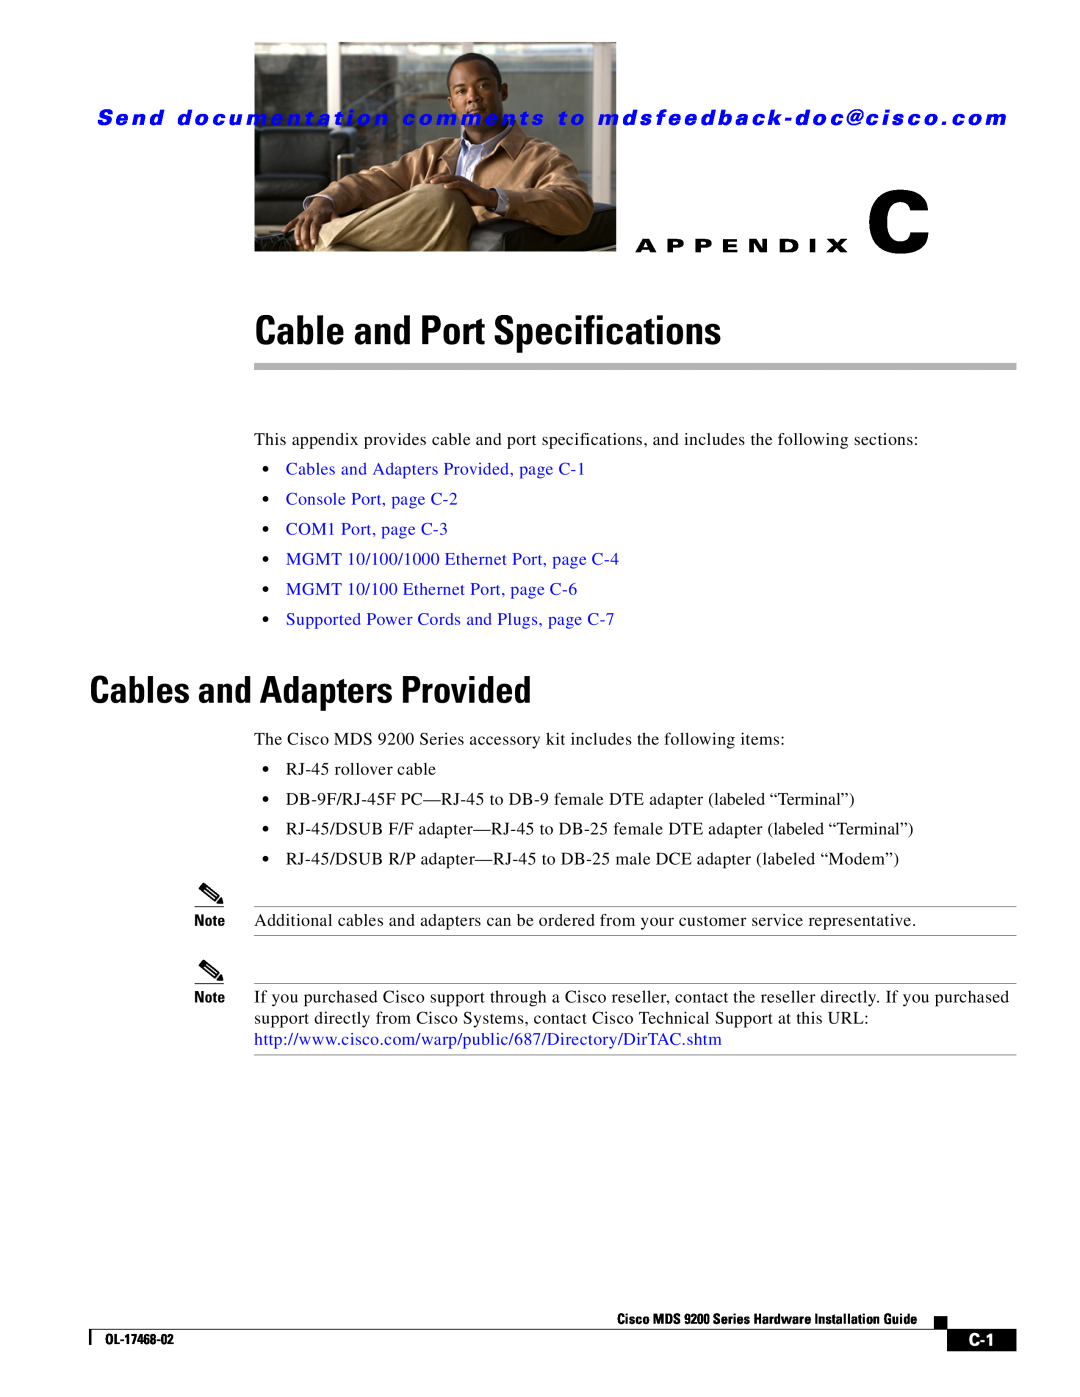 Cisco Systems MDS 9200 Series manual Cable and Port Specifications, Cables and Adapters Provided, A P P E N D I X C 